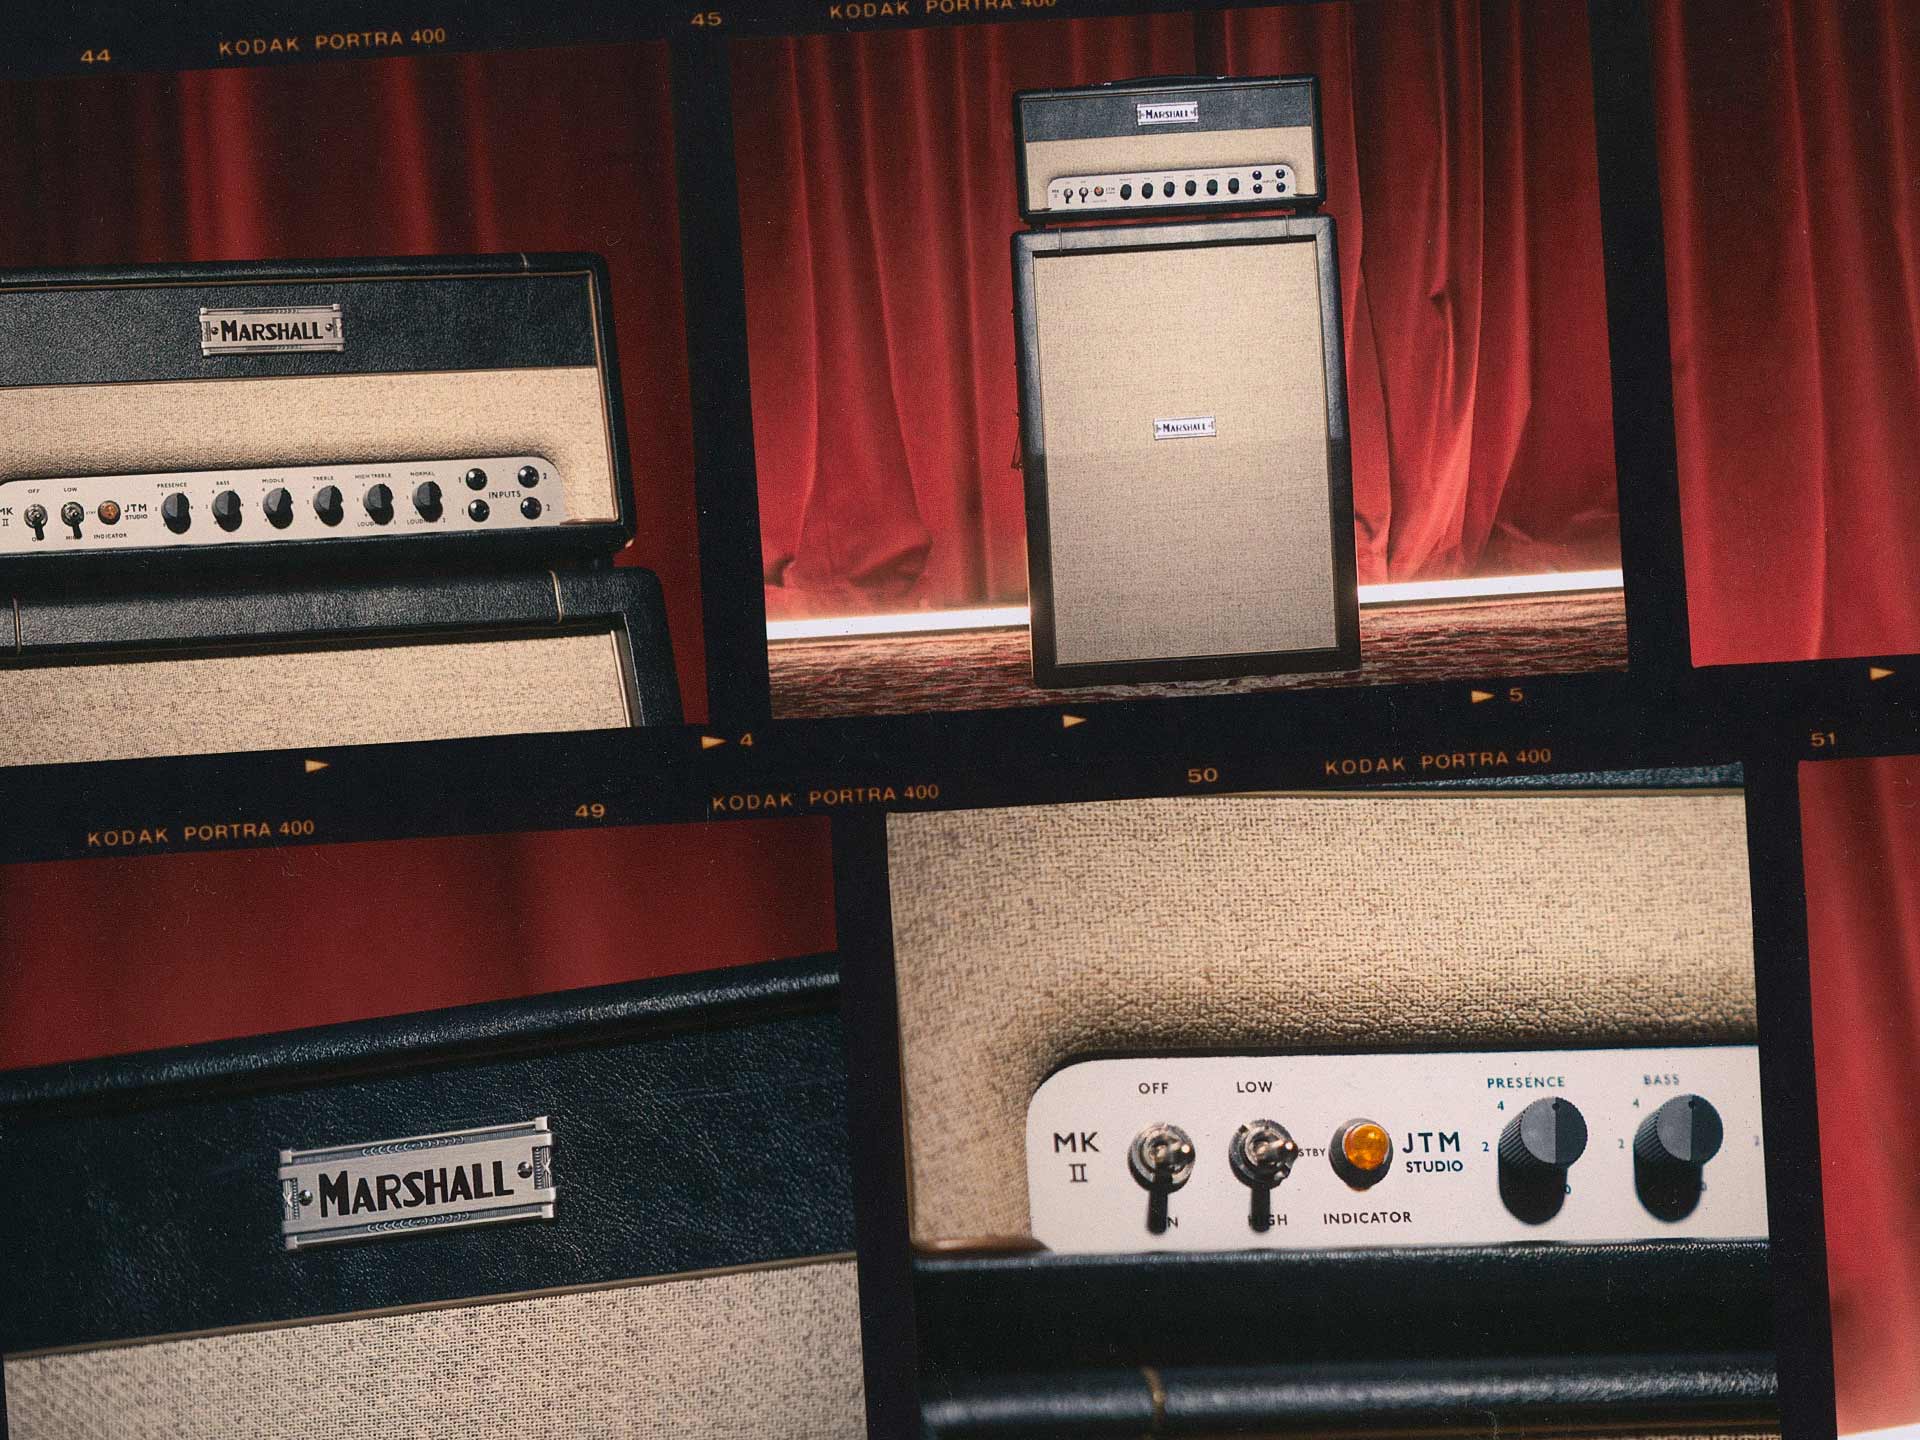 Marshall Amps series of photos collage